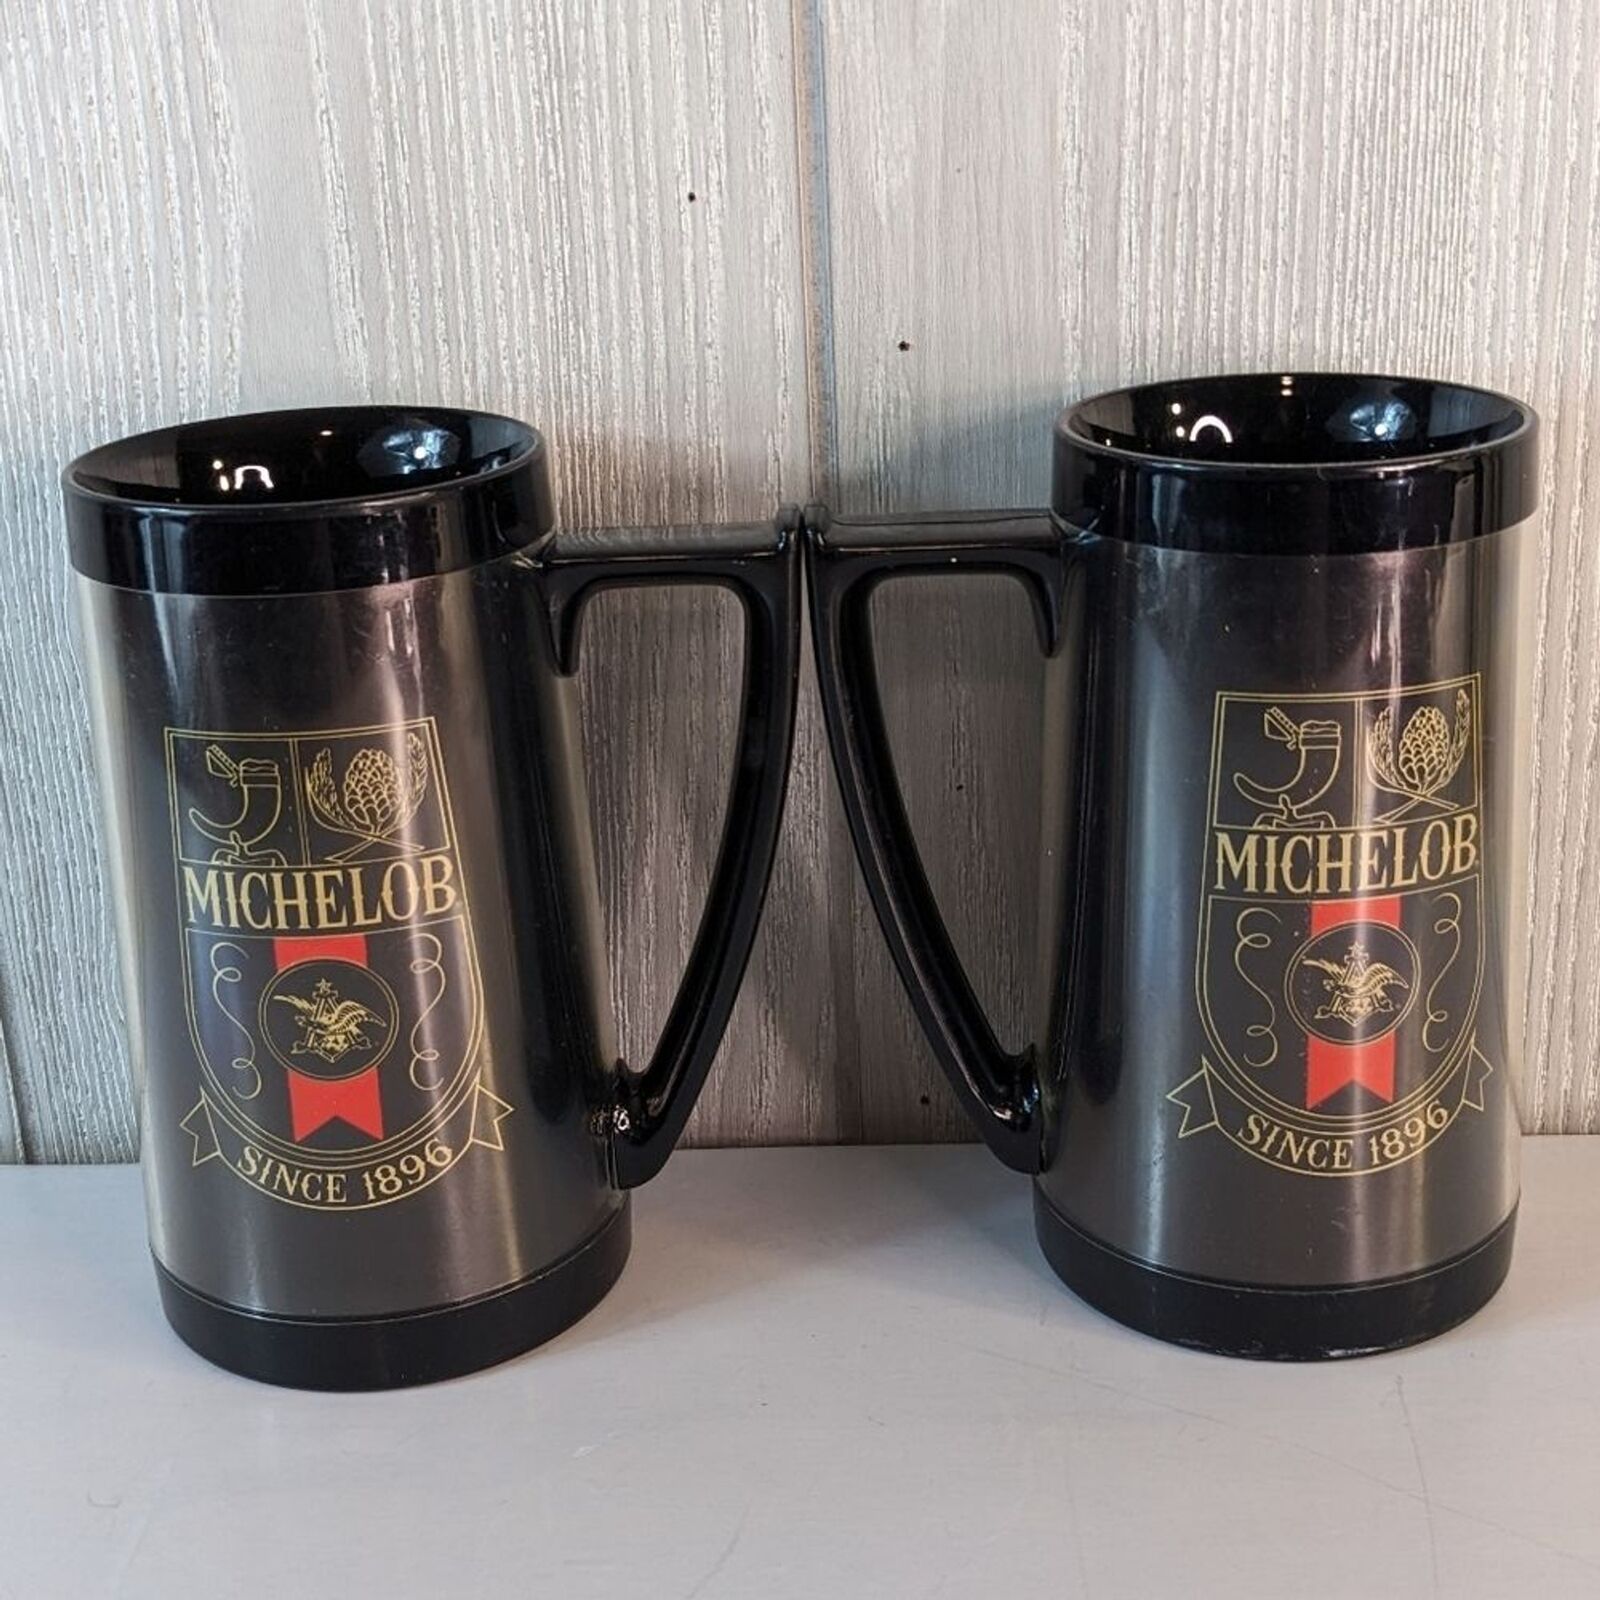 VTG Michelob Thermo-Serve Insulated Beer Mugs Black Made in the USA Set of 2